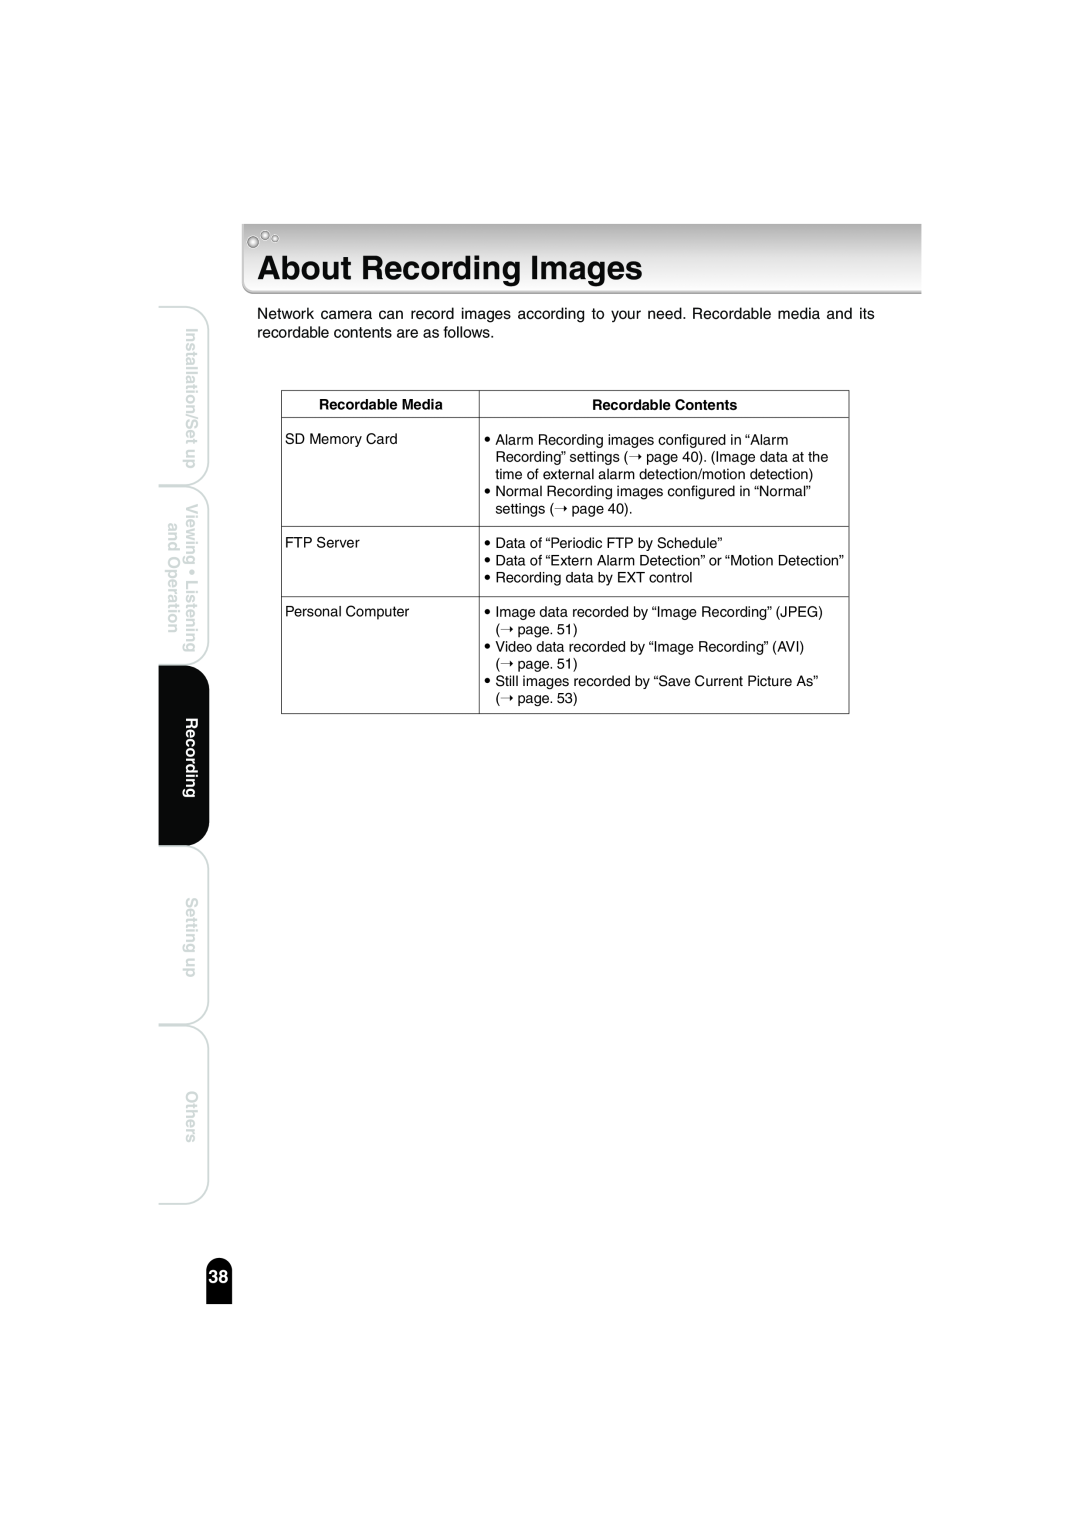 Toshiba IK-WB02A About Recording Images, Recordable Media, Recordable Contents, Installation/Set up, Setting up Others 